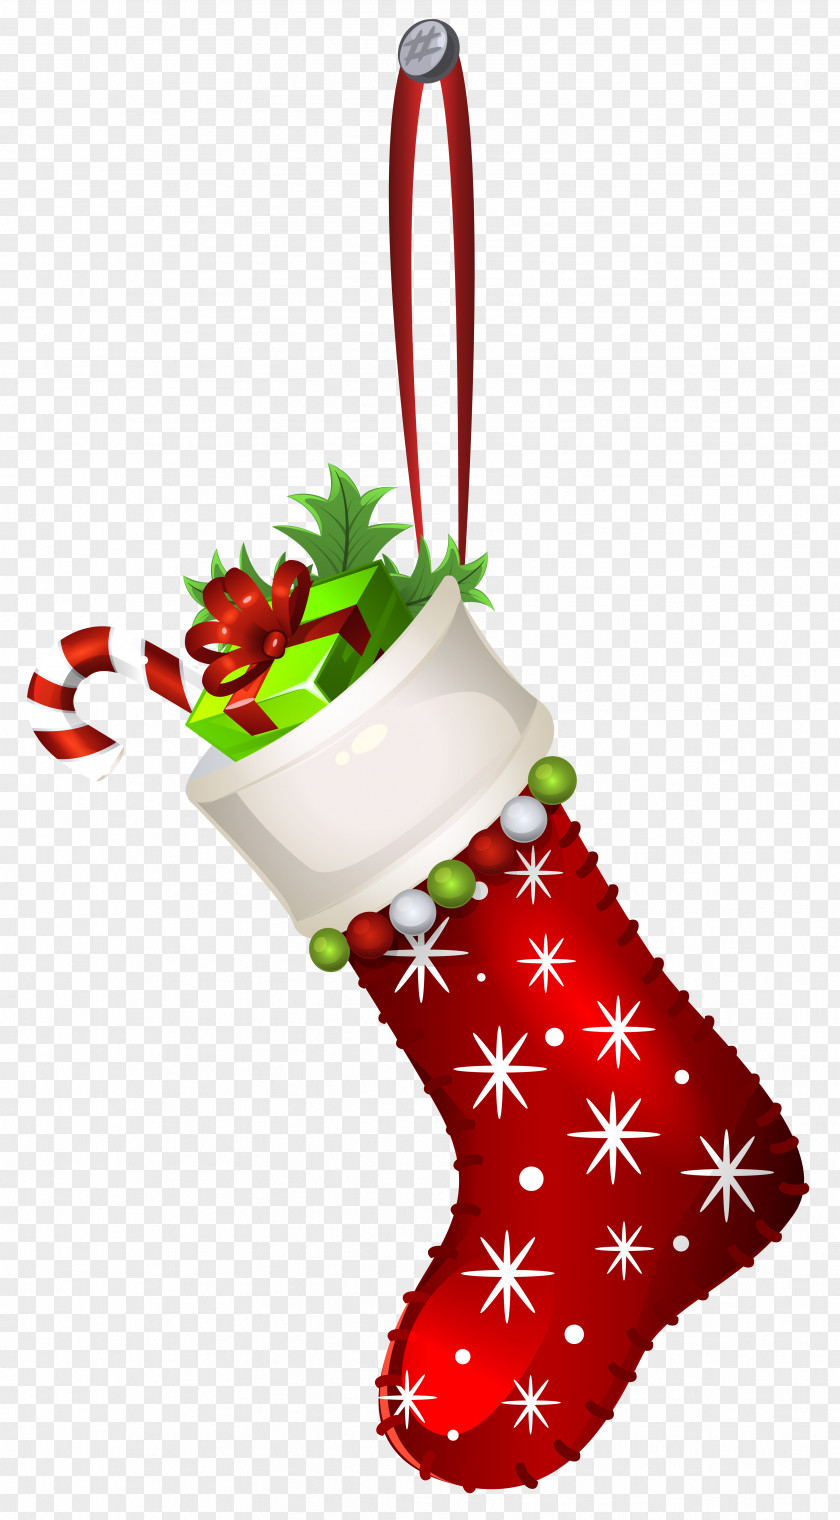 Red Christmas Stocking Transparent Clip Art Image Ornament Decoration PNG